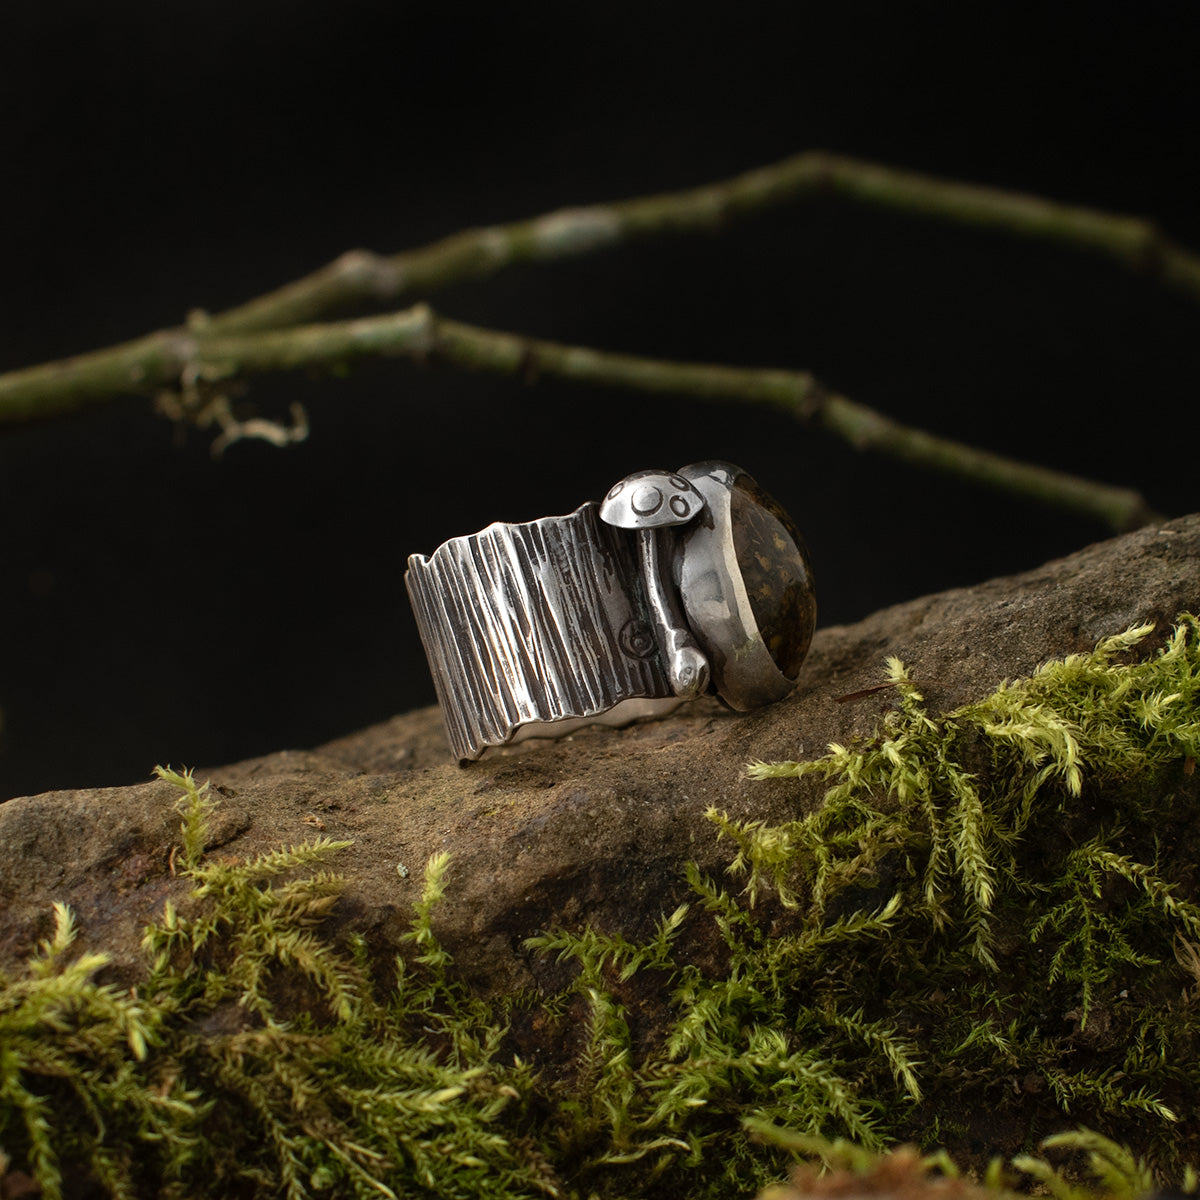 The left side of the Real Lichen Double Toadstool Ring shows one of its sterling silver mushrooms and its vividly patinated bark band.